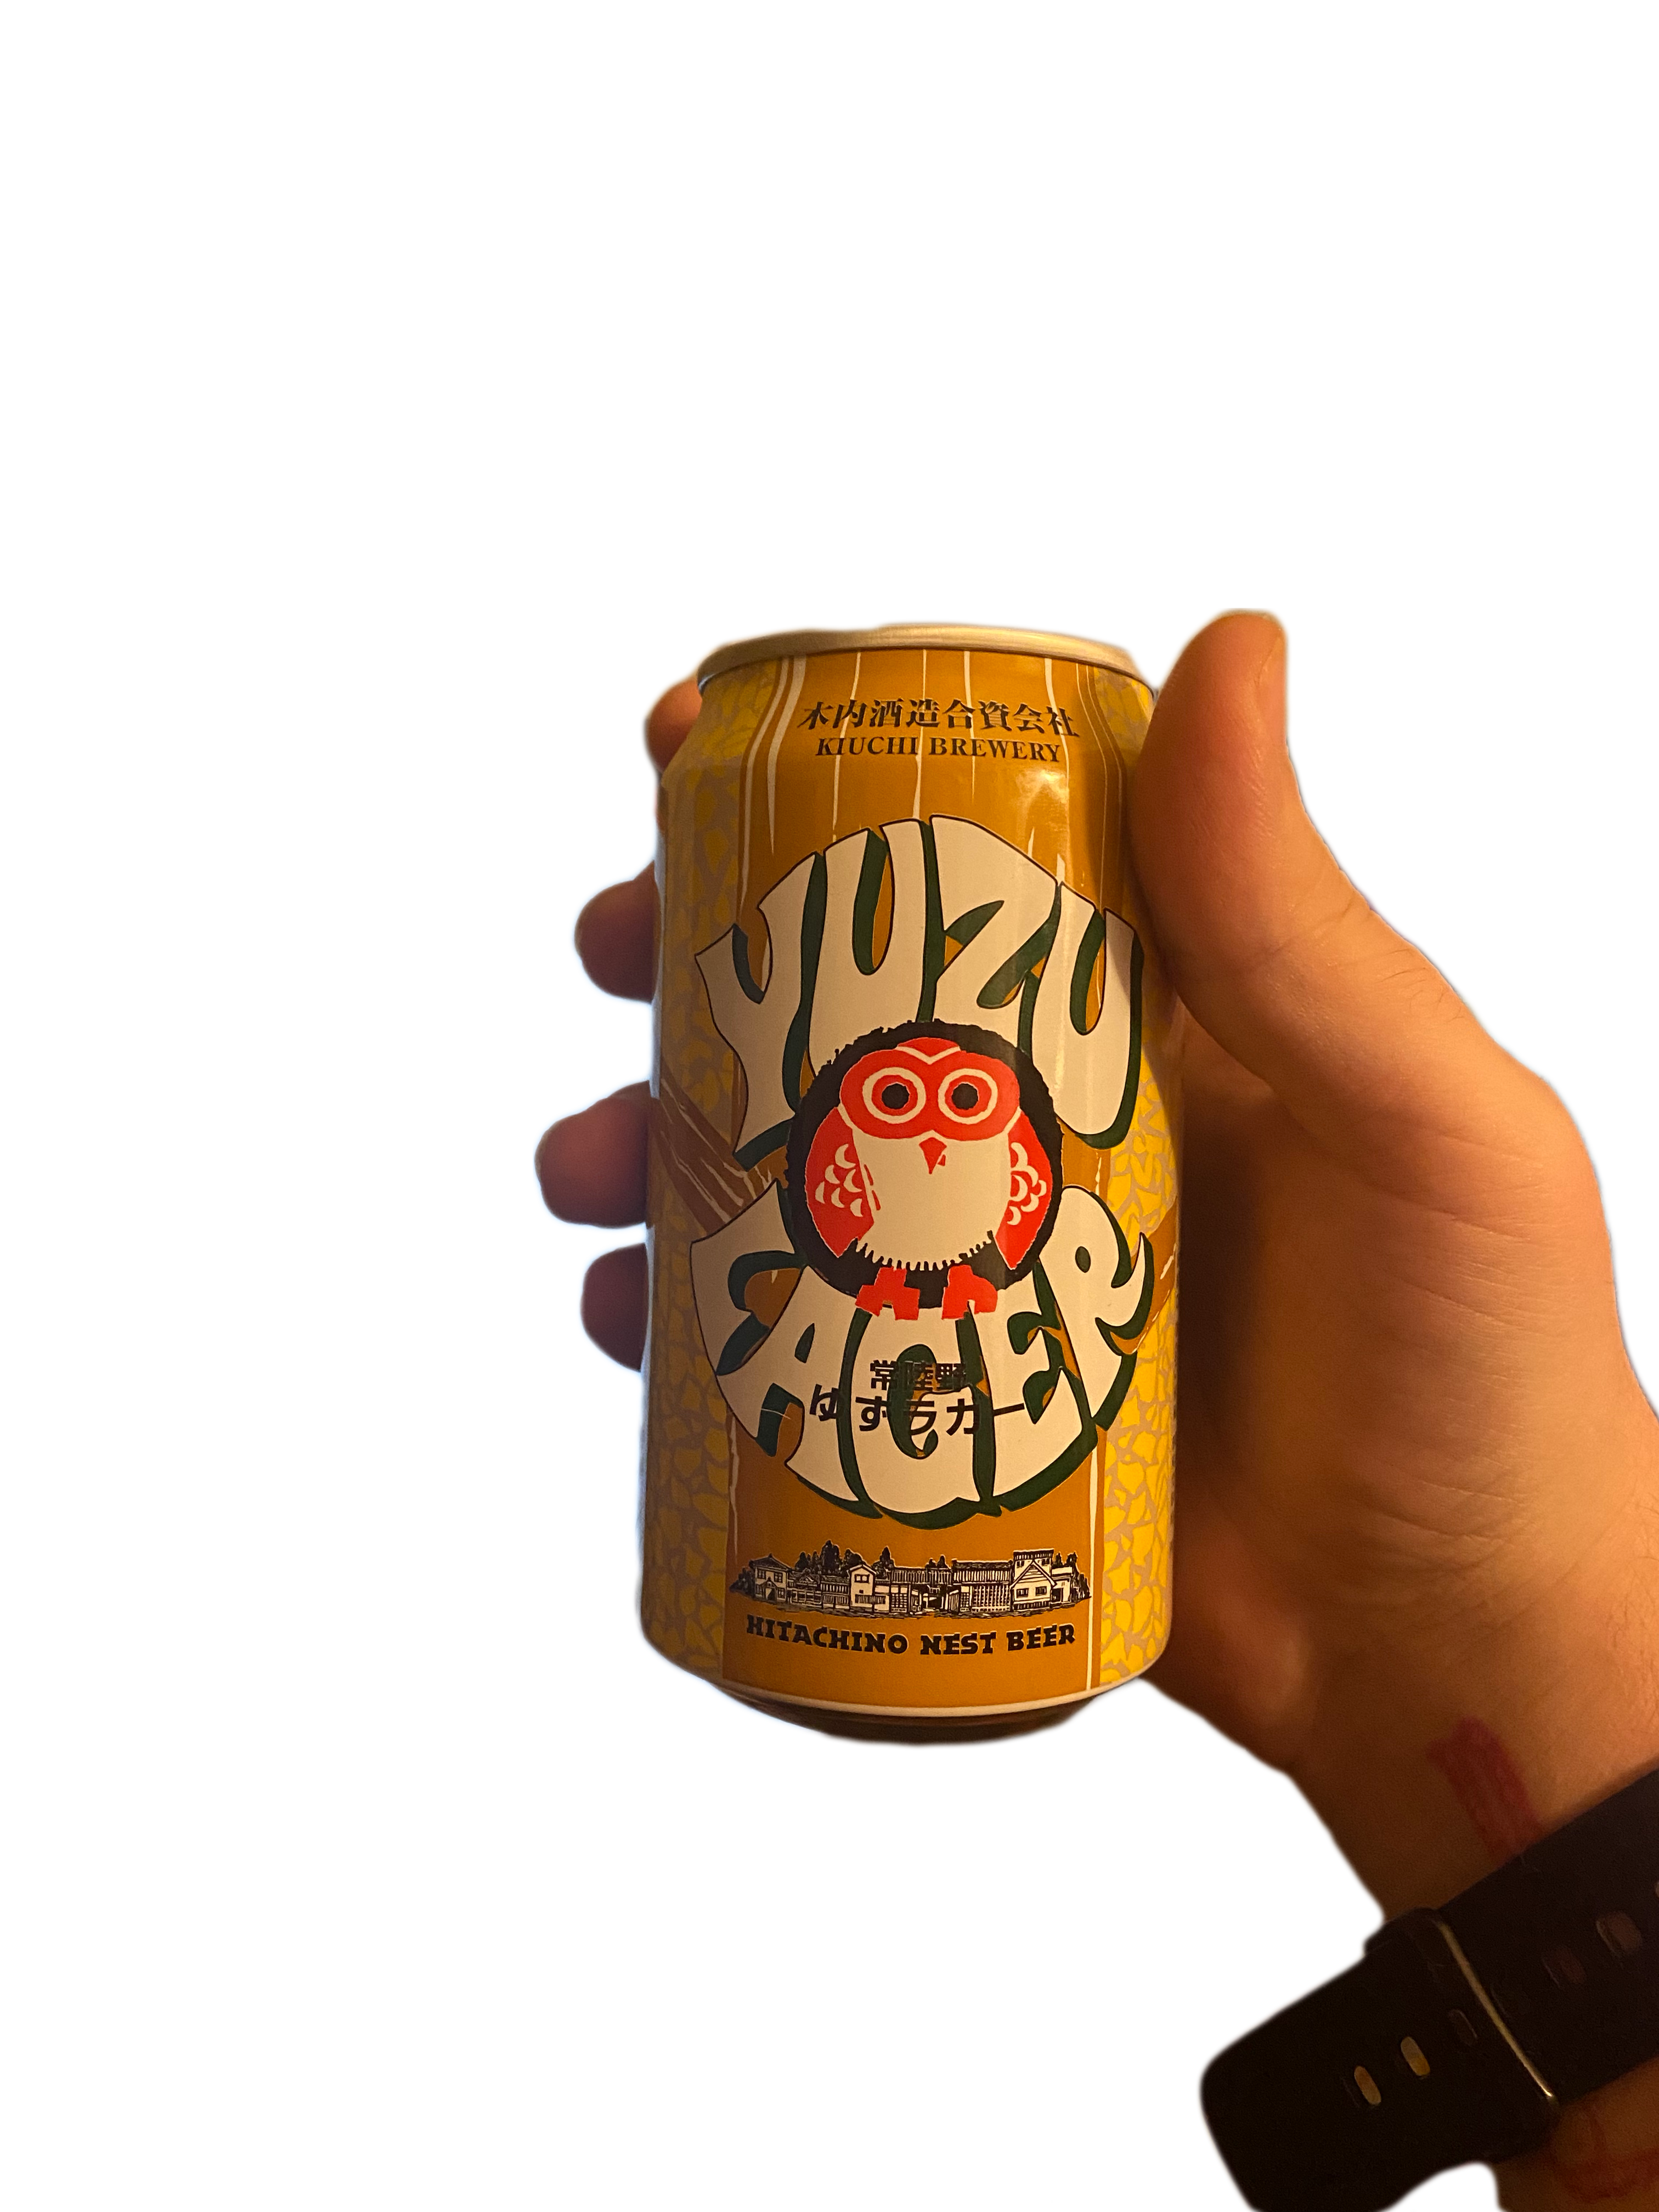 a cut out of my hand holding a can of beer, it says kiuchi brewery in japanese and english as well as YUZU LAGER, there is a cute owl between YUZU and LAGER, and it then says Hitachino Nest Beer below